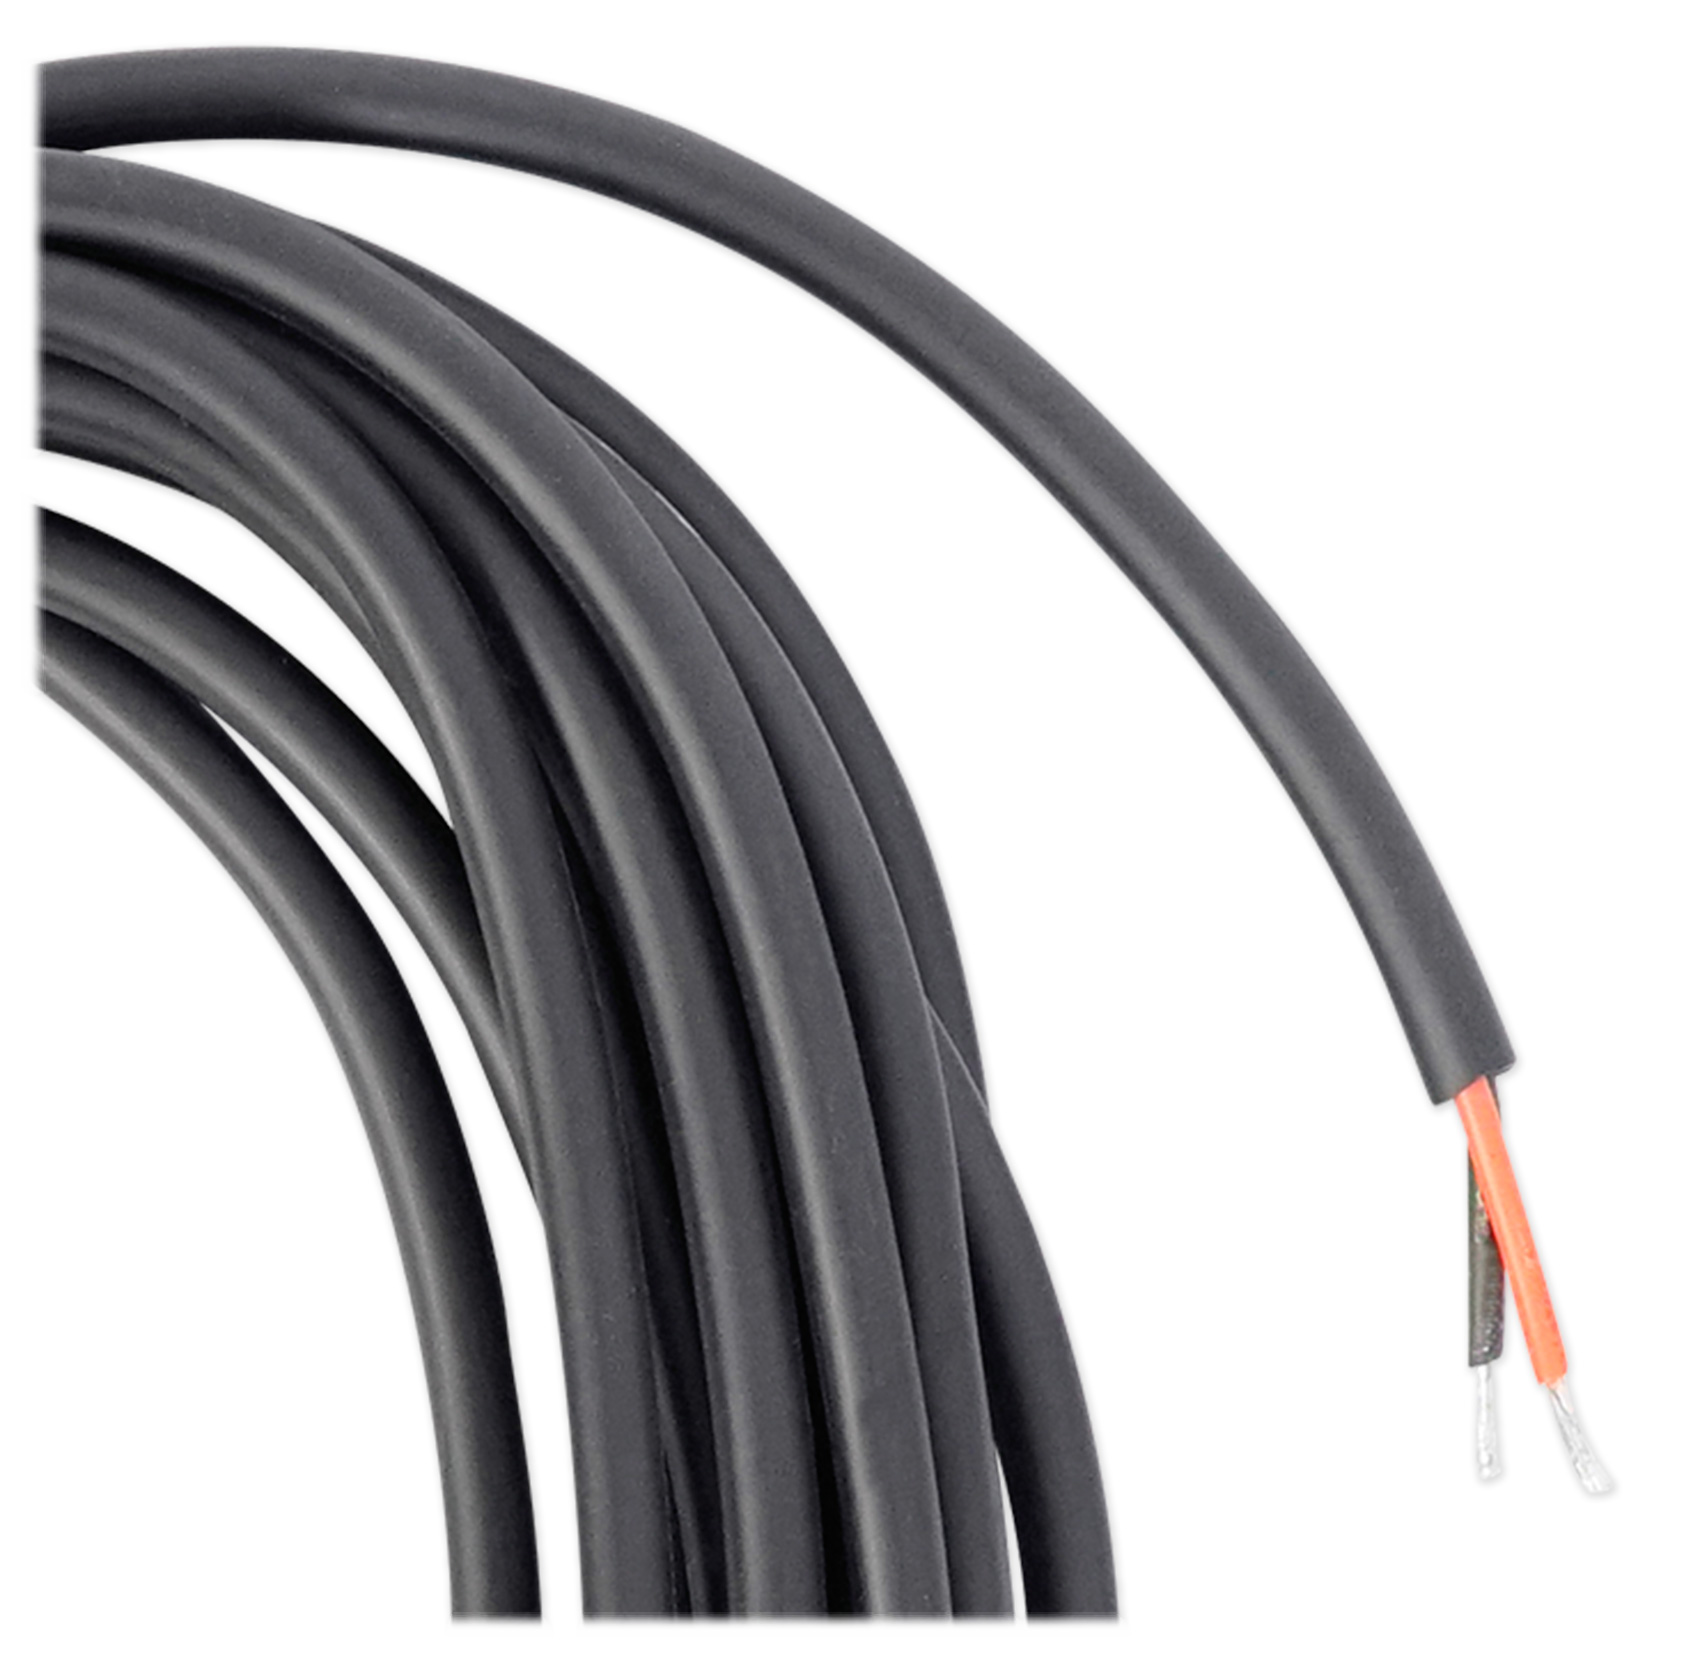 Rockville RTSBW20 20 Foot 1/4" TS to Bare Wire Speaker Cable,16 AWG,100 Copper 819216020418 eBay